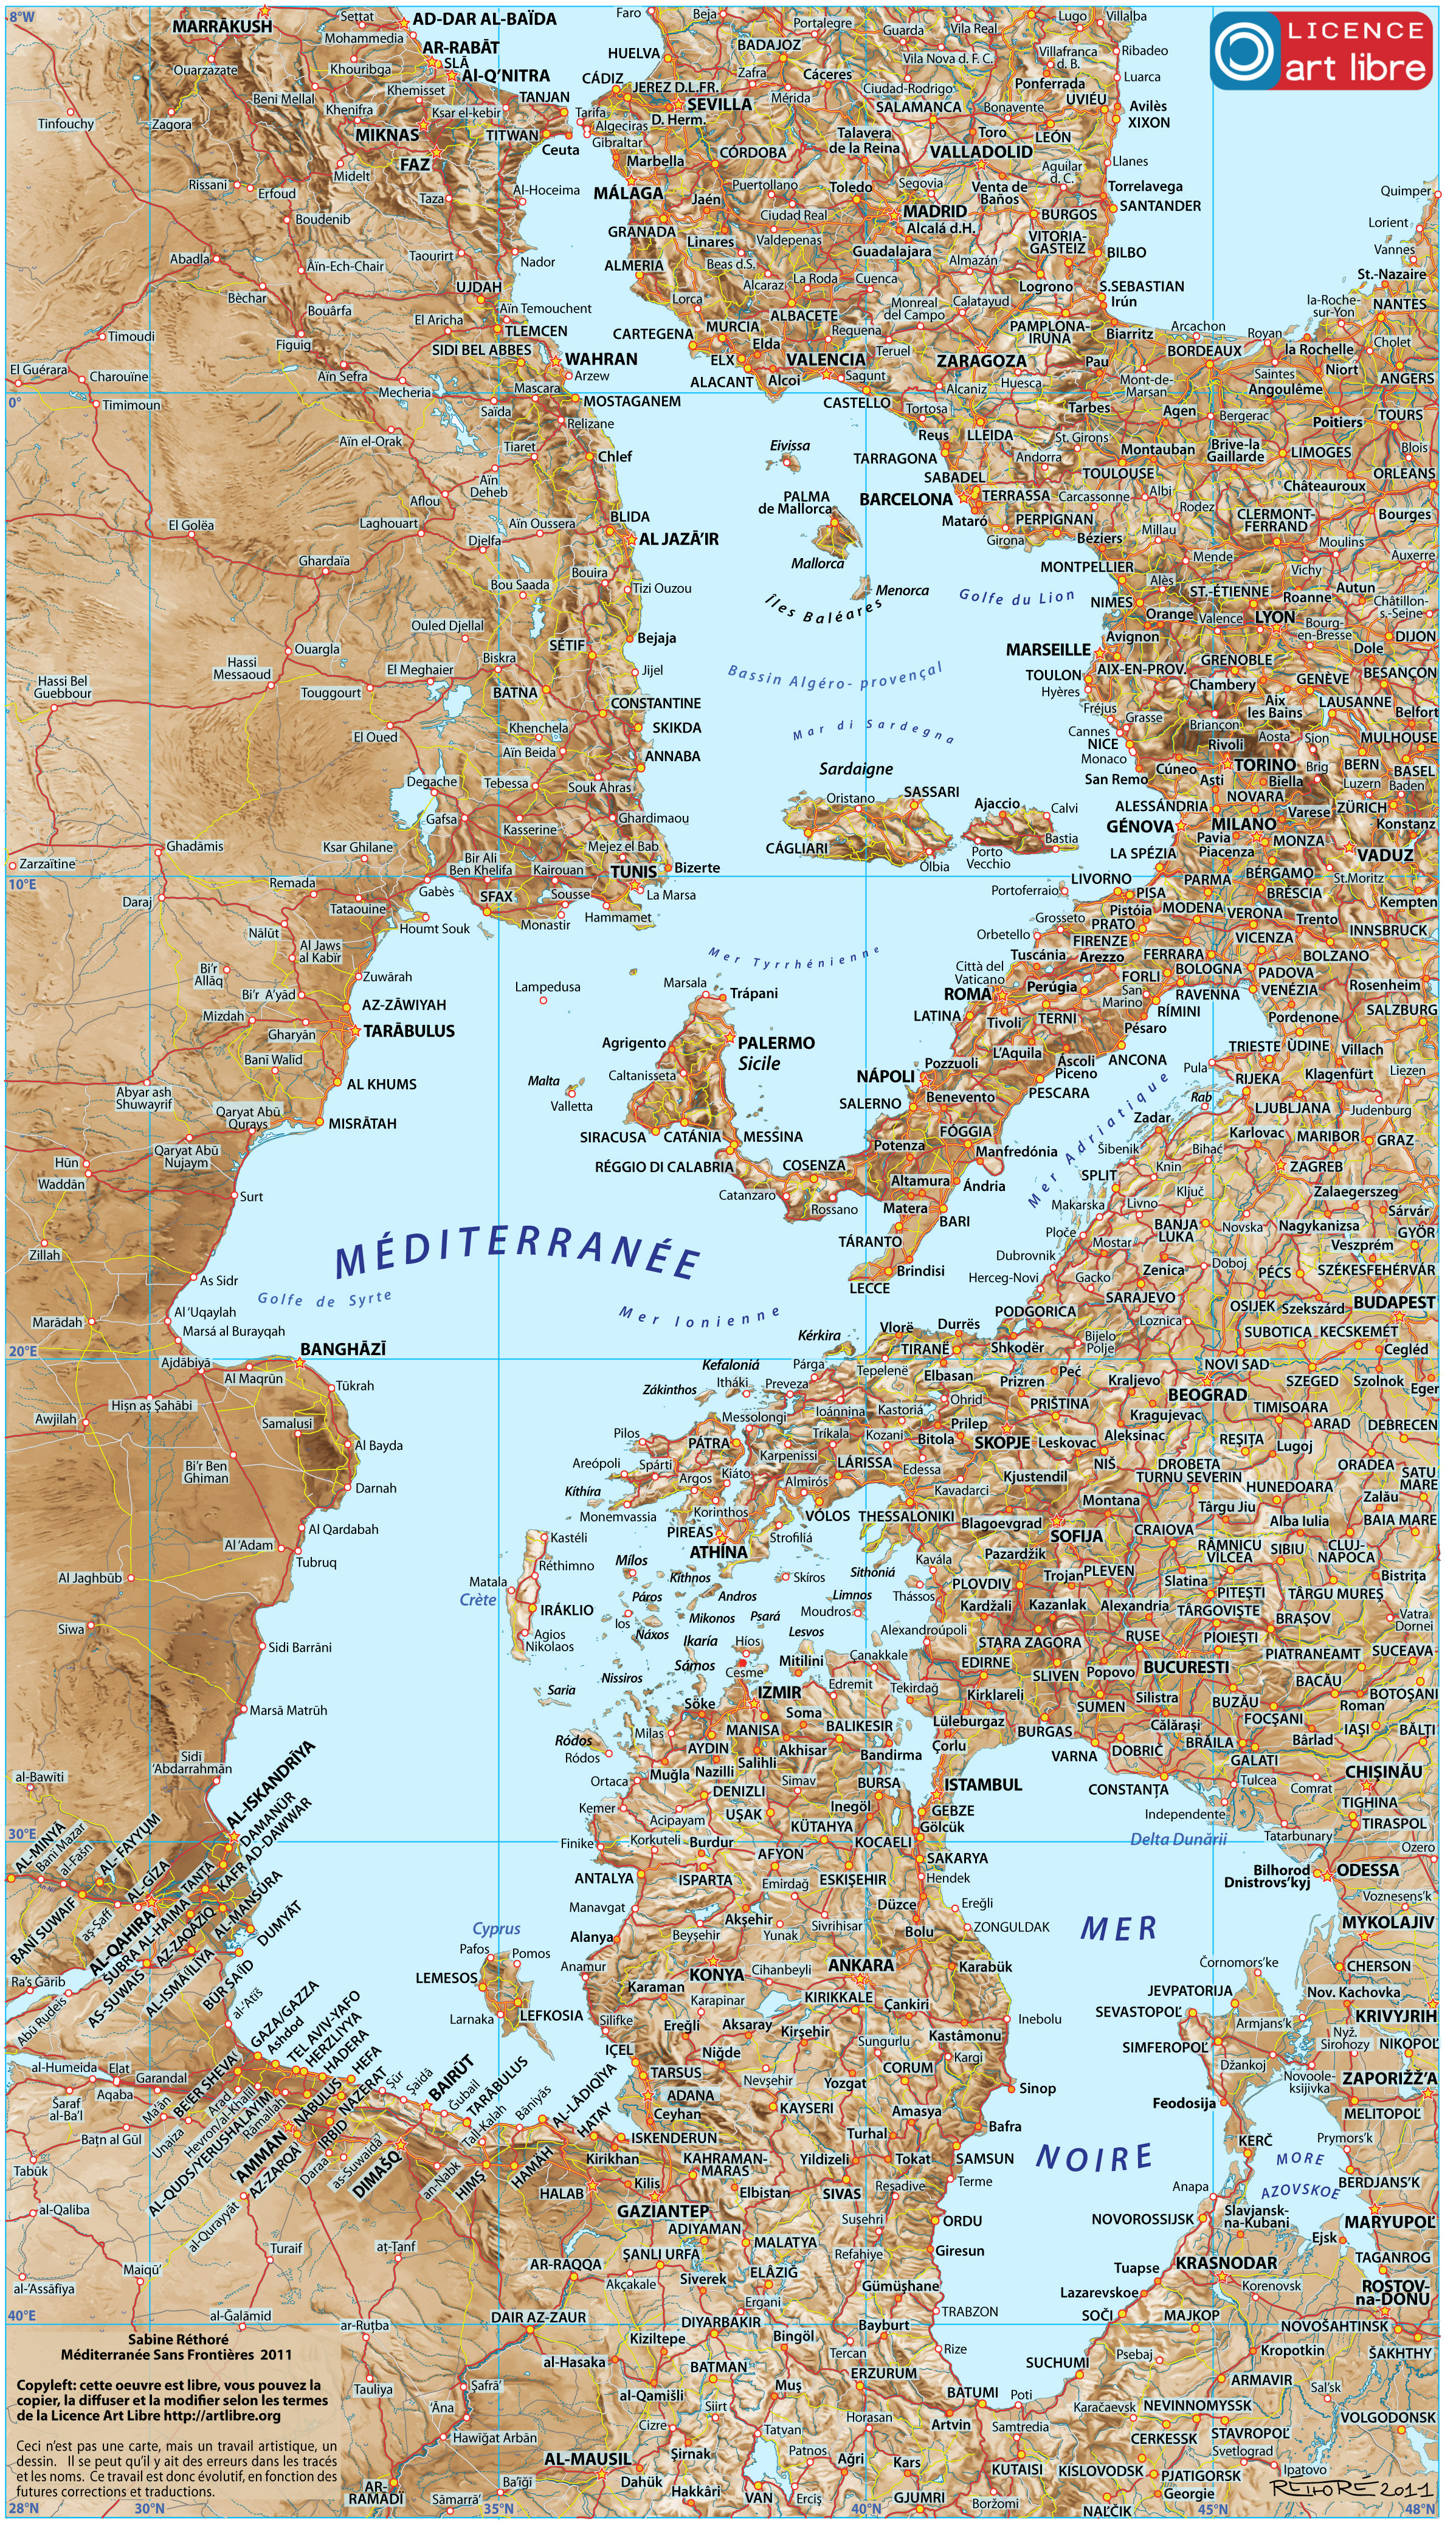 A map of the Mediterranean, with the North pointing to the right